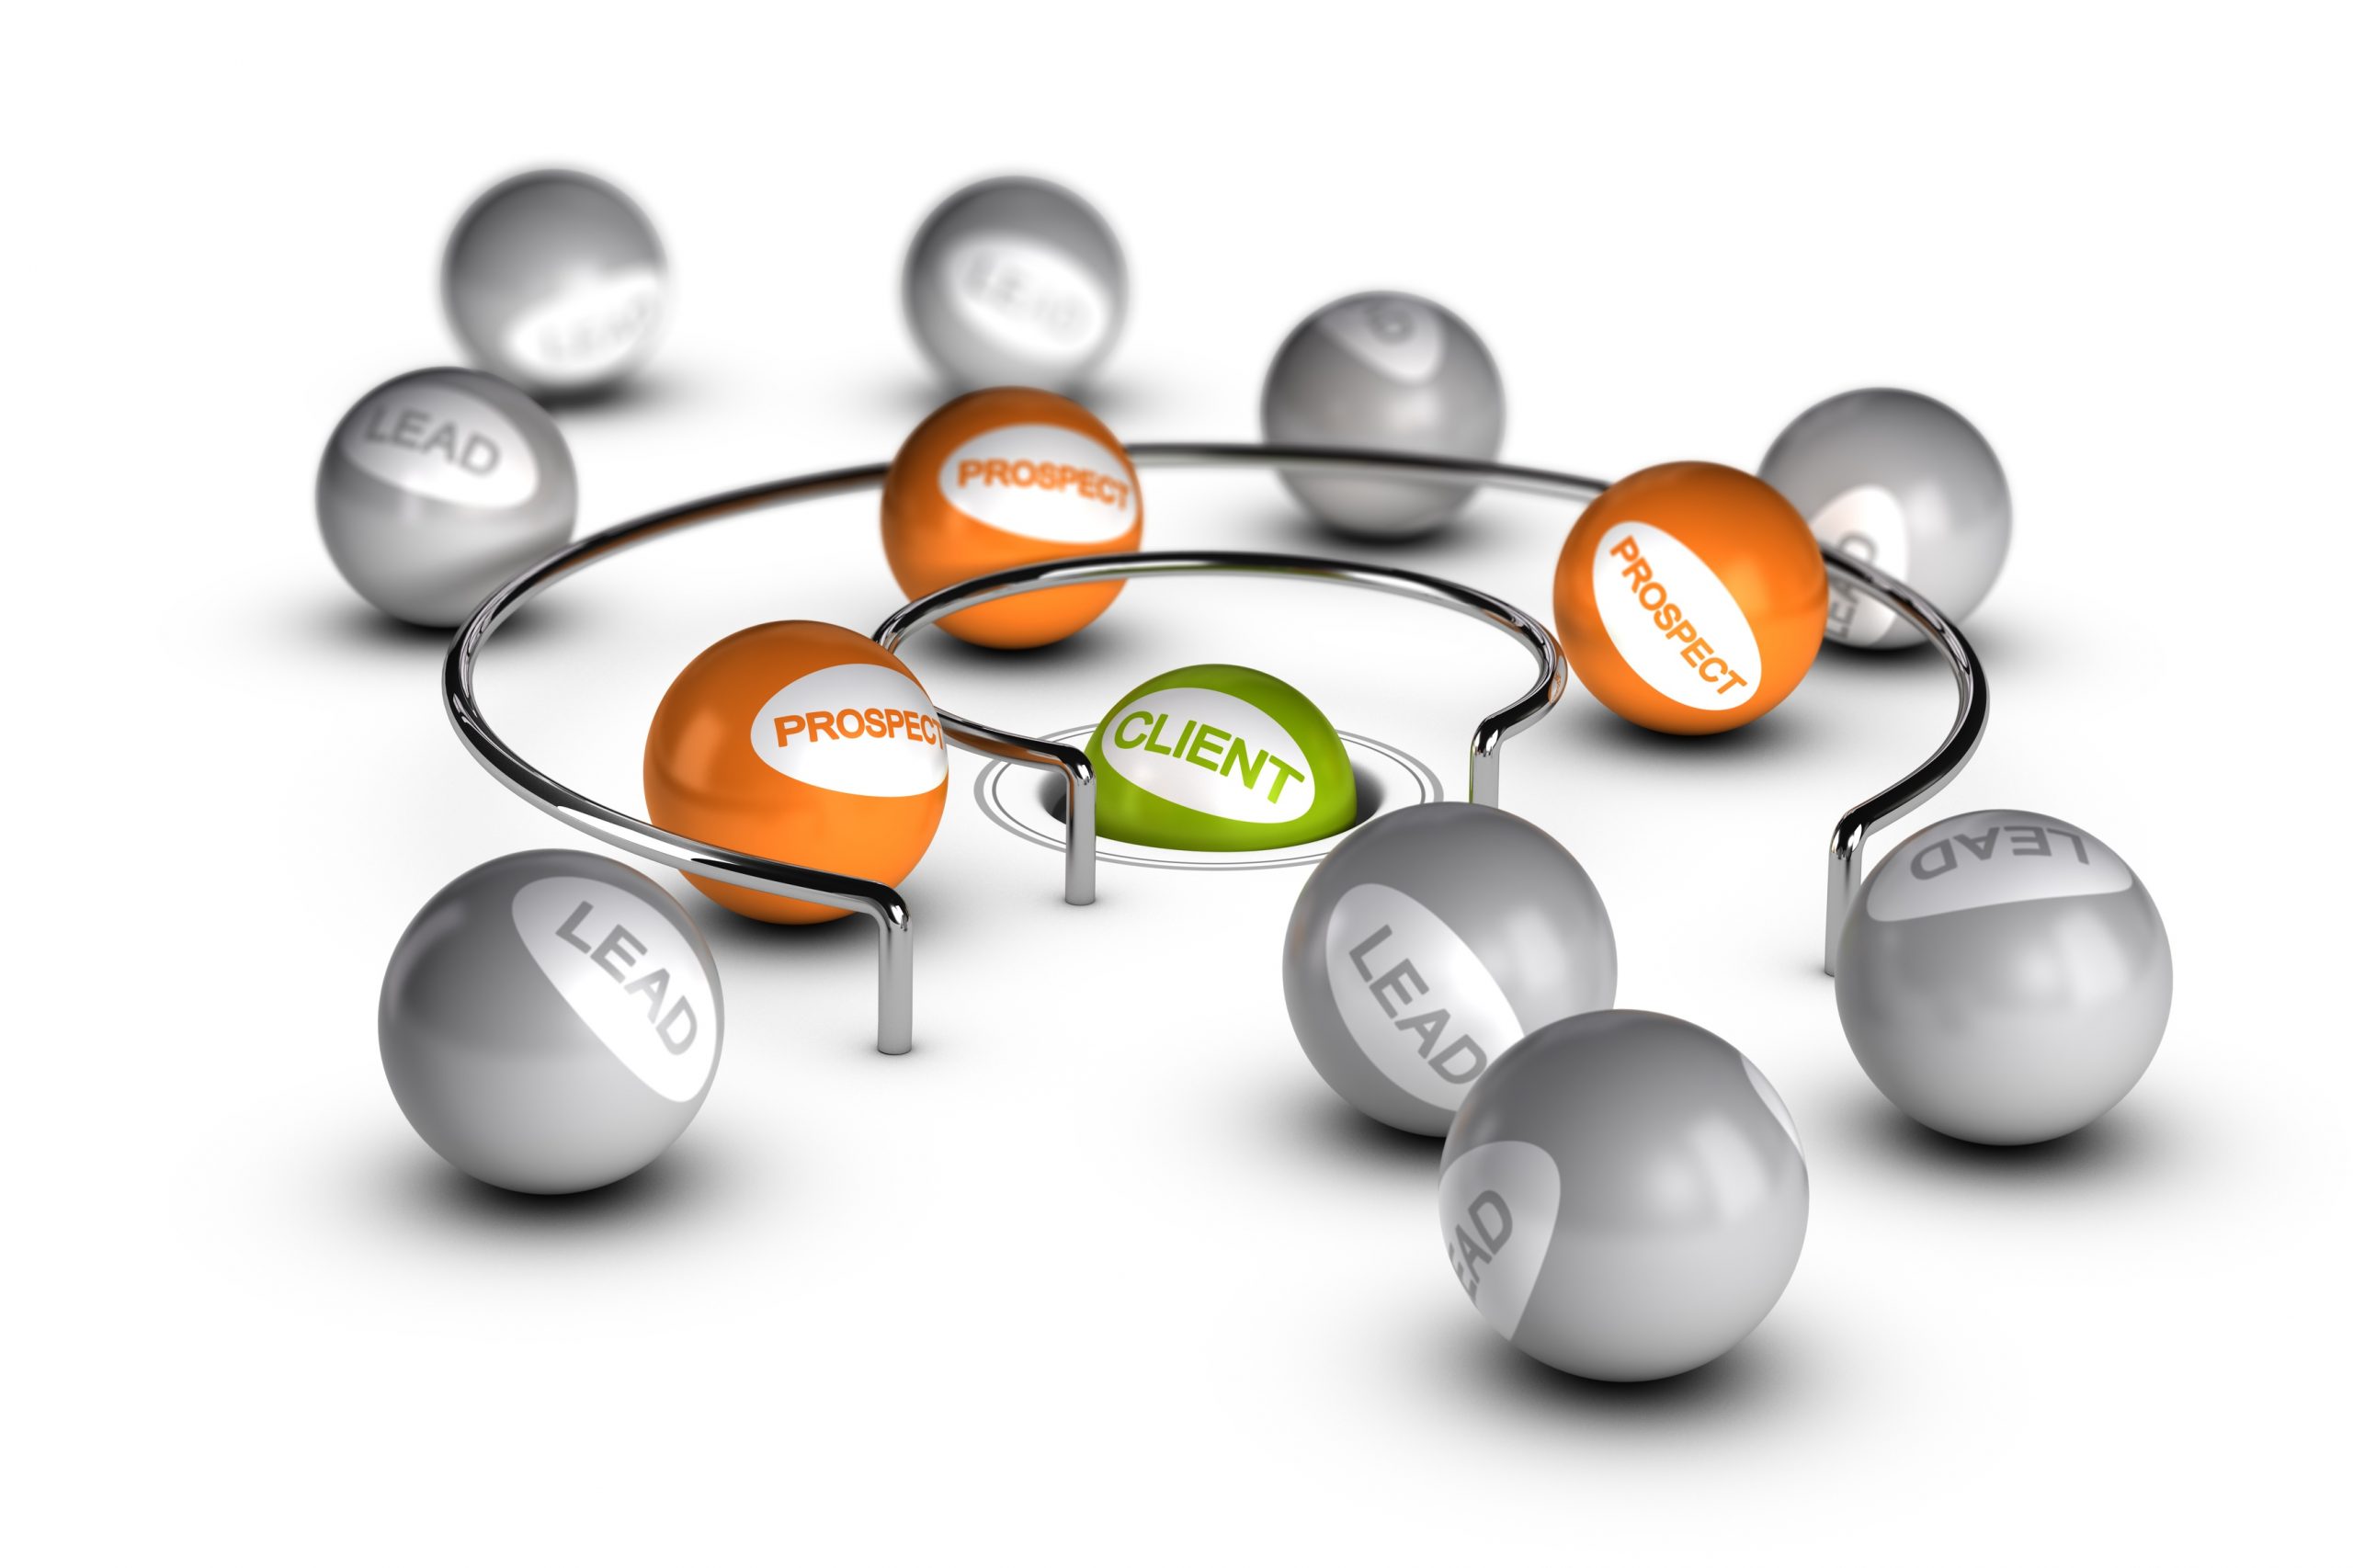 B2B Lead Generation Services Designed To Convert Into Sales